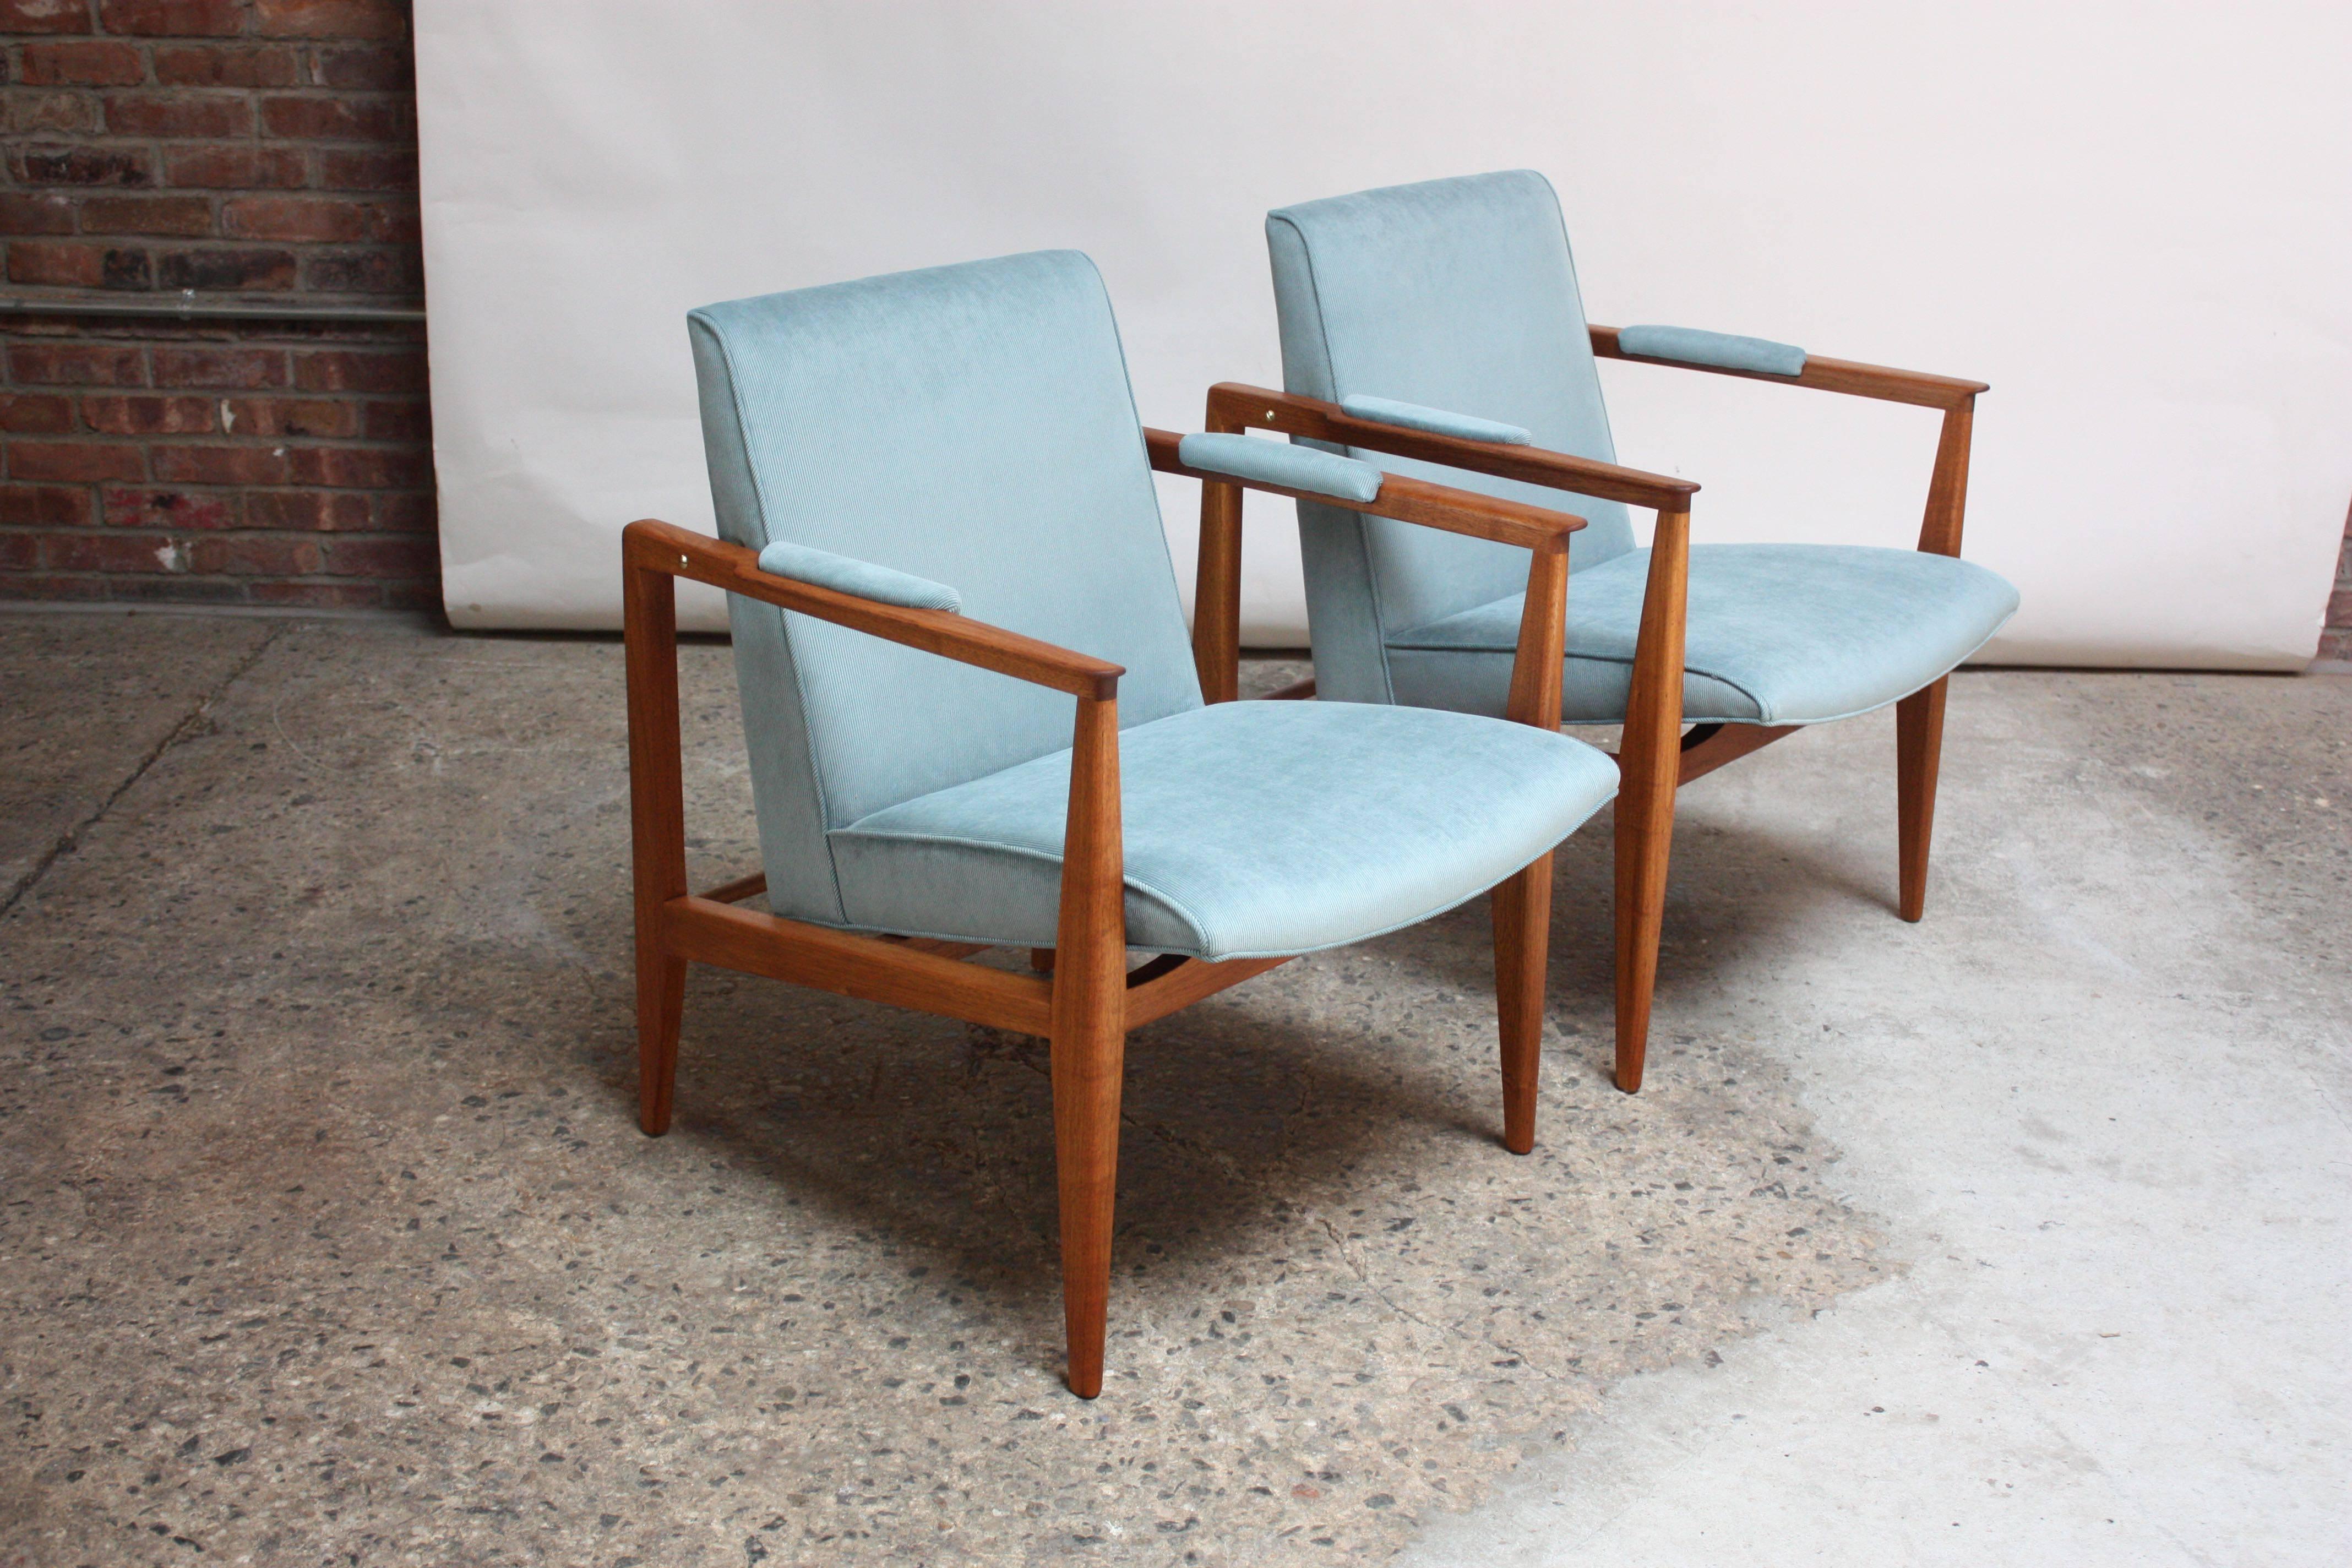 Exquisite and uncommon Dunbar armchairs composed of mahogany frames, brass accents and covered in a light blue corduroy (a tightly woven corduroy whose wales / ribs are close together - swatch available upon request). The color photographs slightly